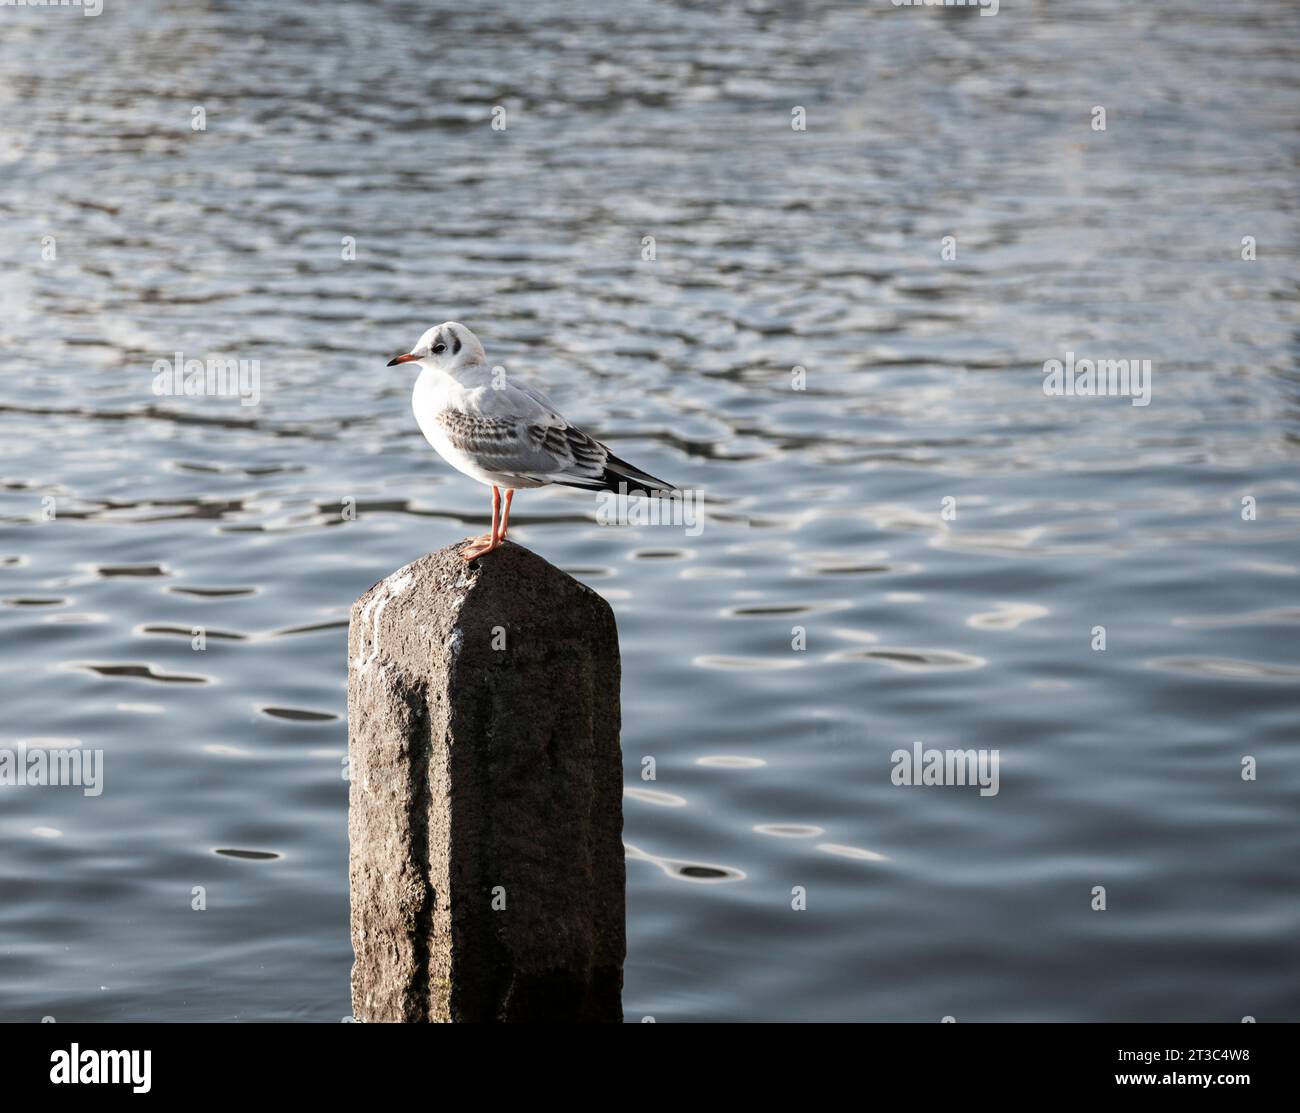 Seagull perched on cement pillar near lake Stock Photo